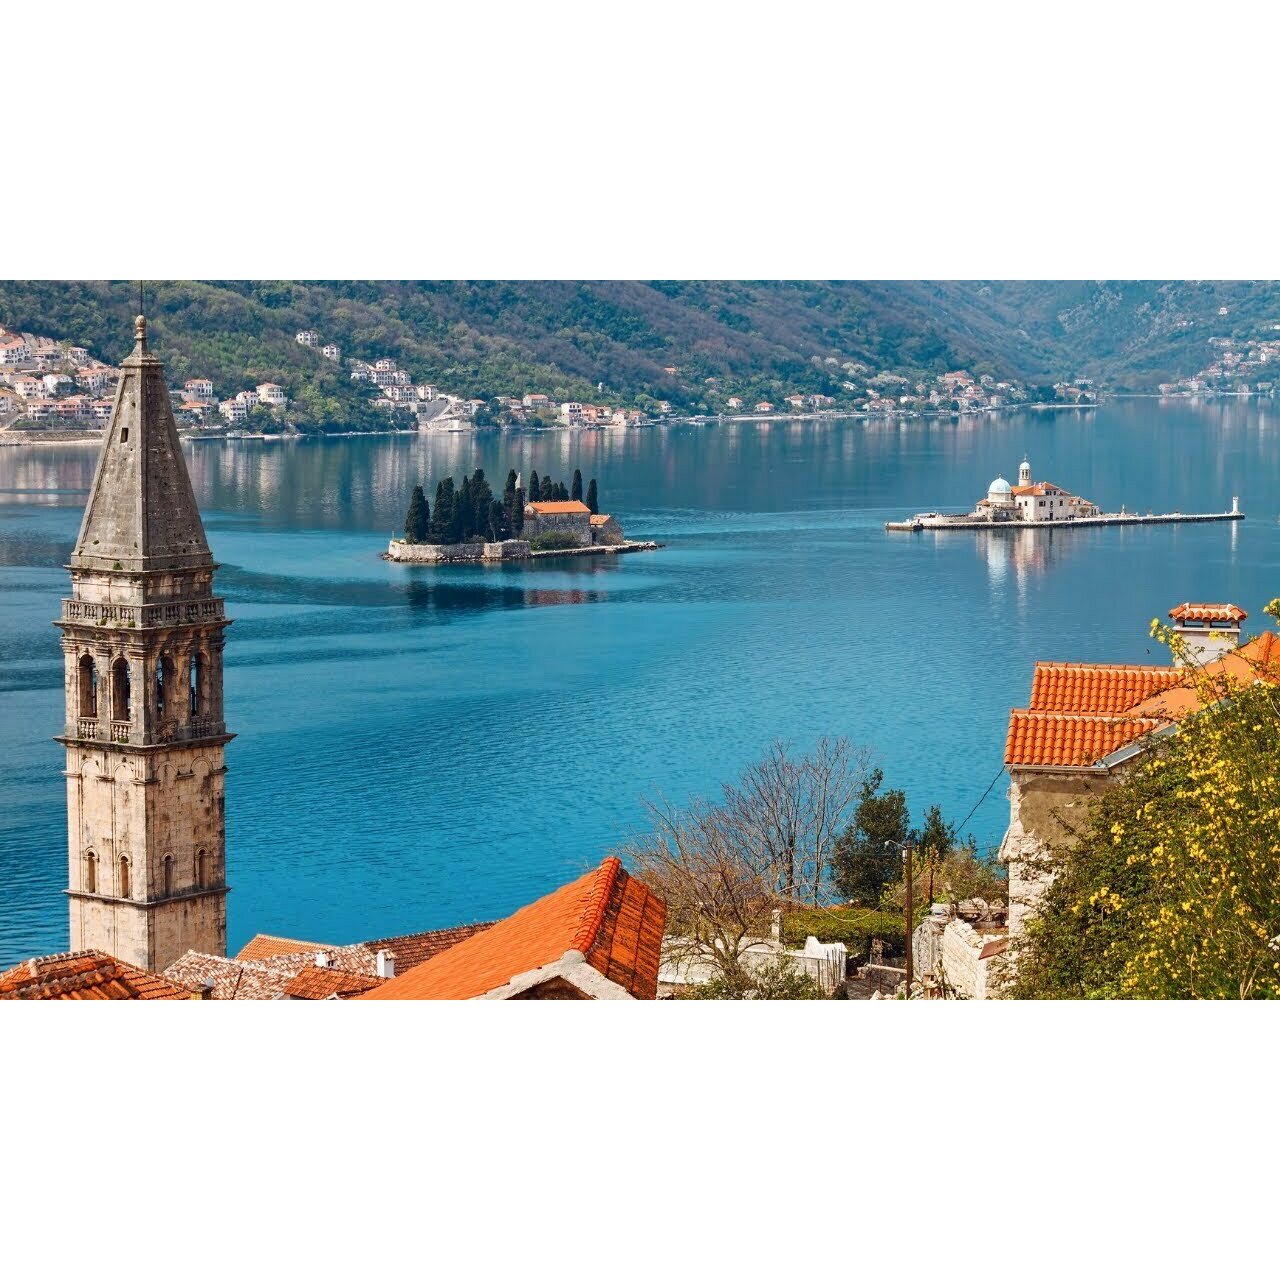 Lonely　Travel　English　Guides　Europe　Planet　Montenegro